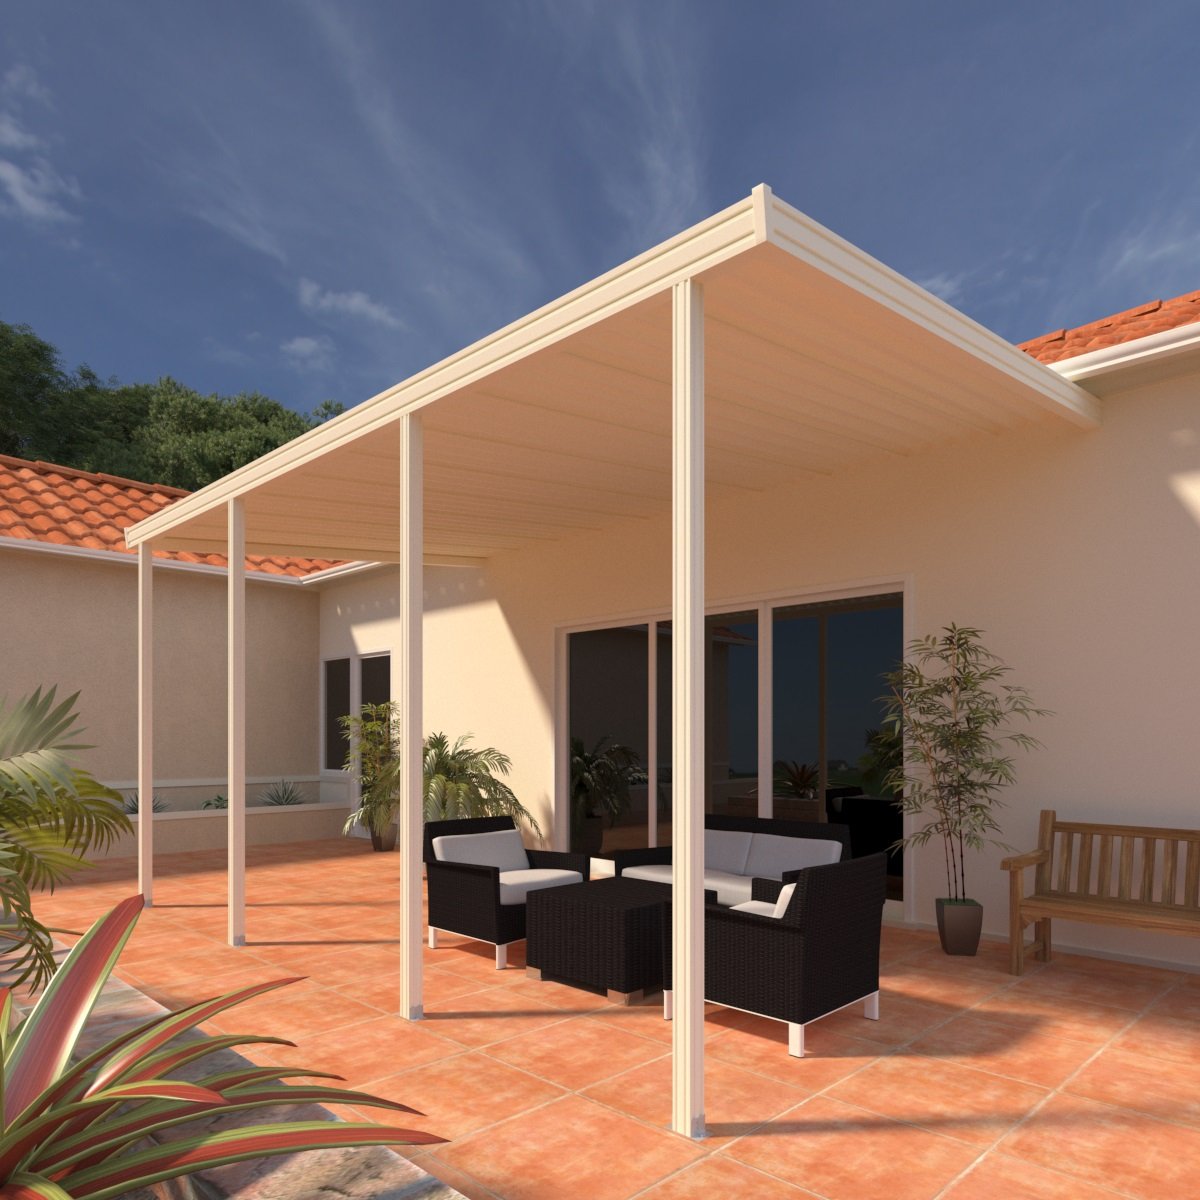 14 ft. Deep x 24 ft. Wide Ivory Attached Aluminum Patio Cover -4 Posts - (10lb Low Snow Area)